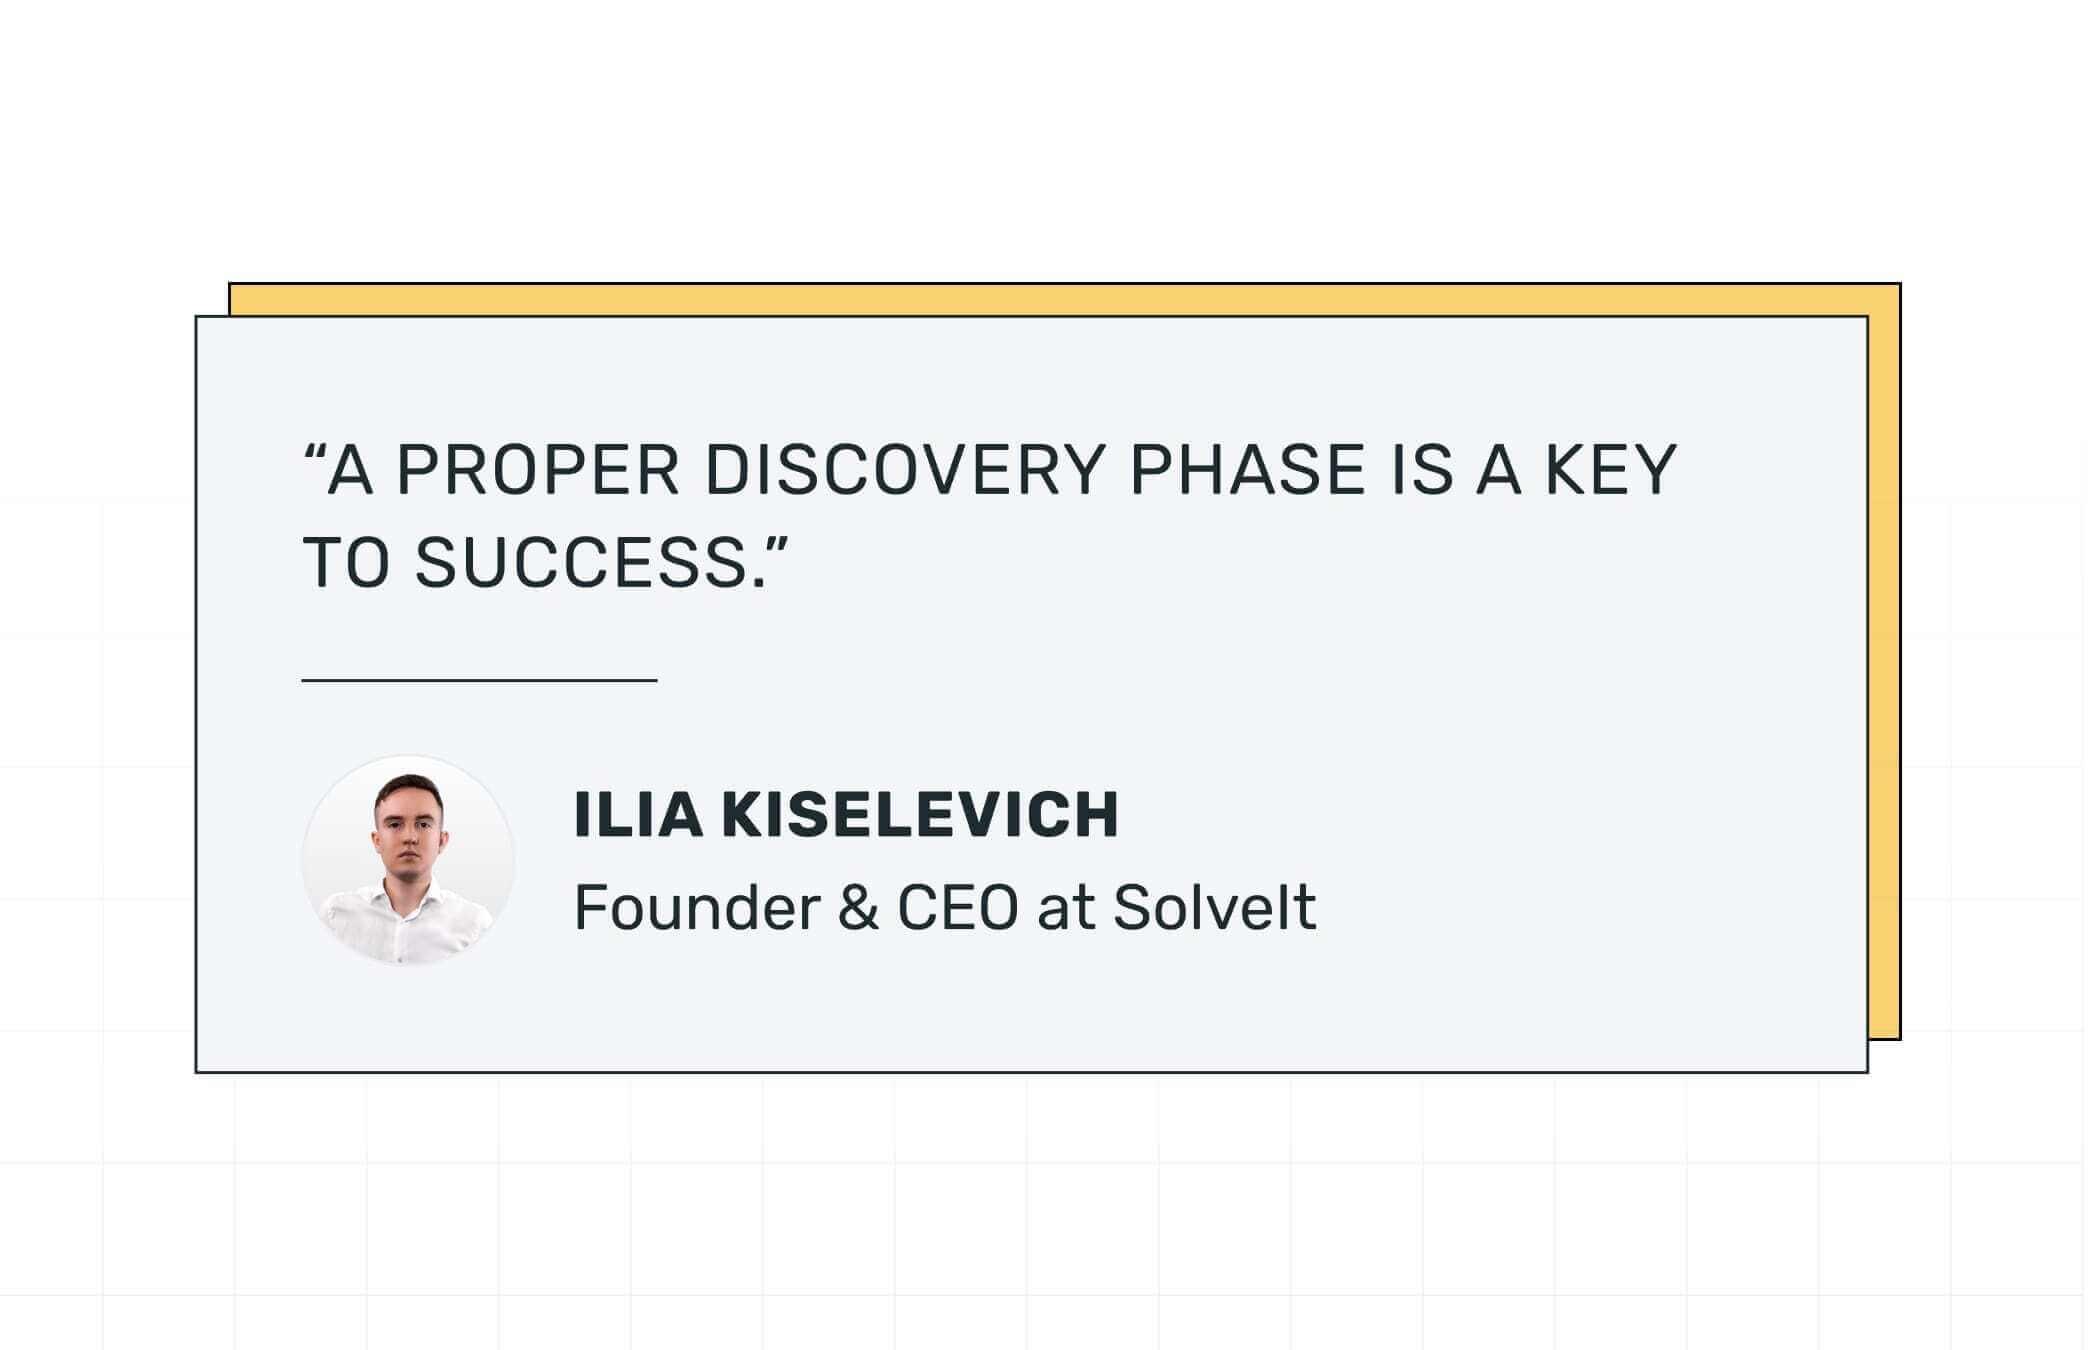 Project discovery phase